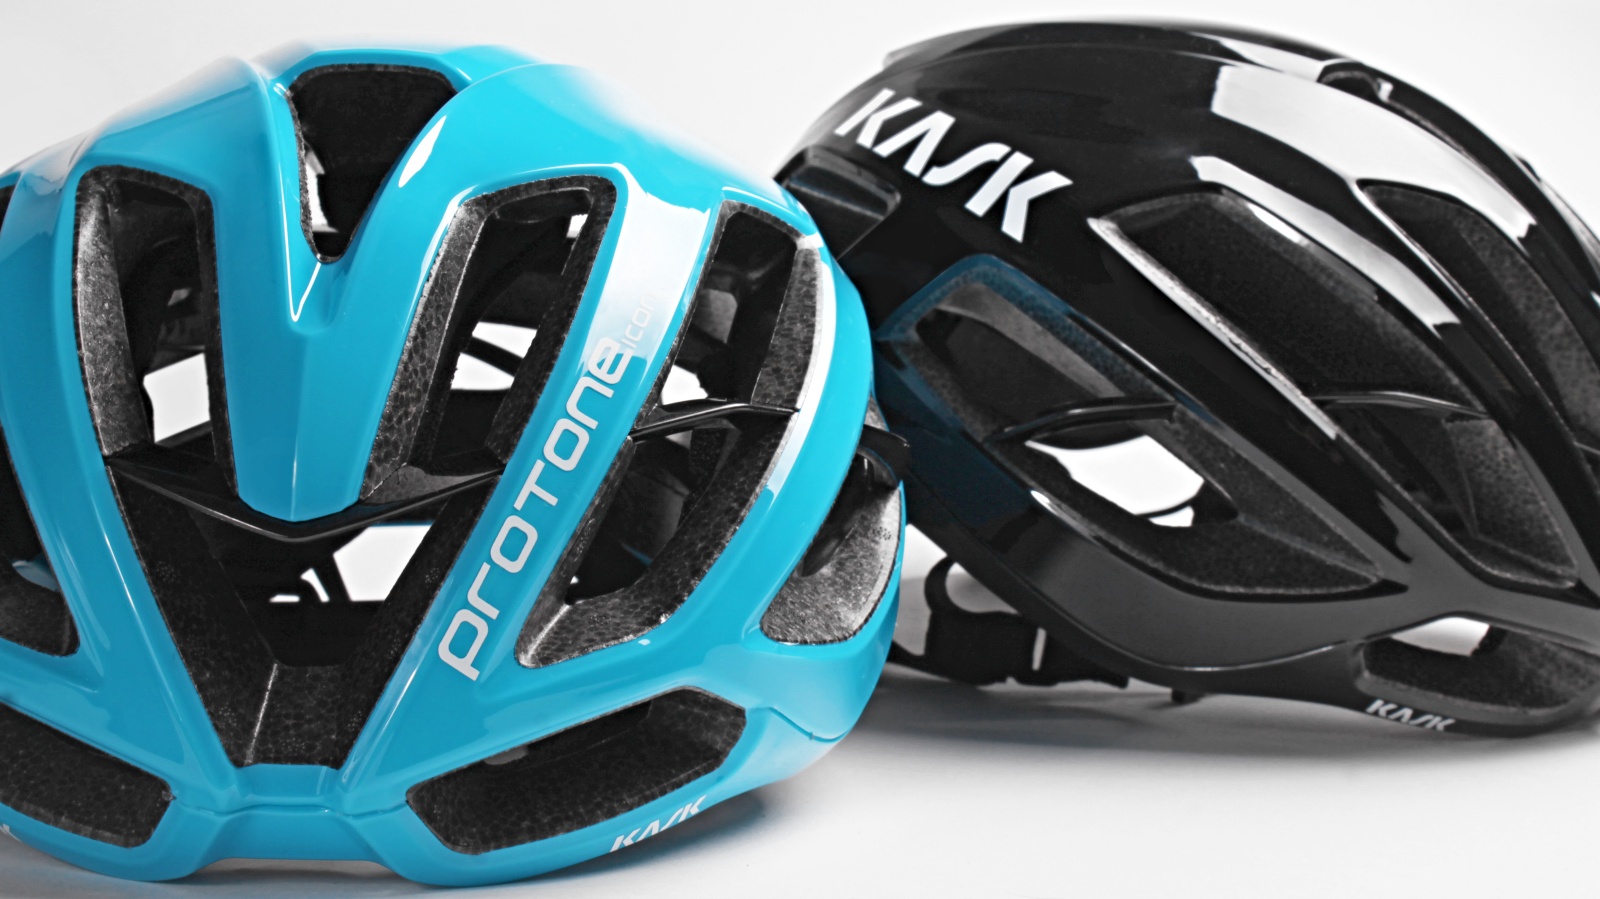 Kask Protone Review | vlr.eng.br